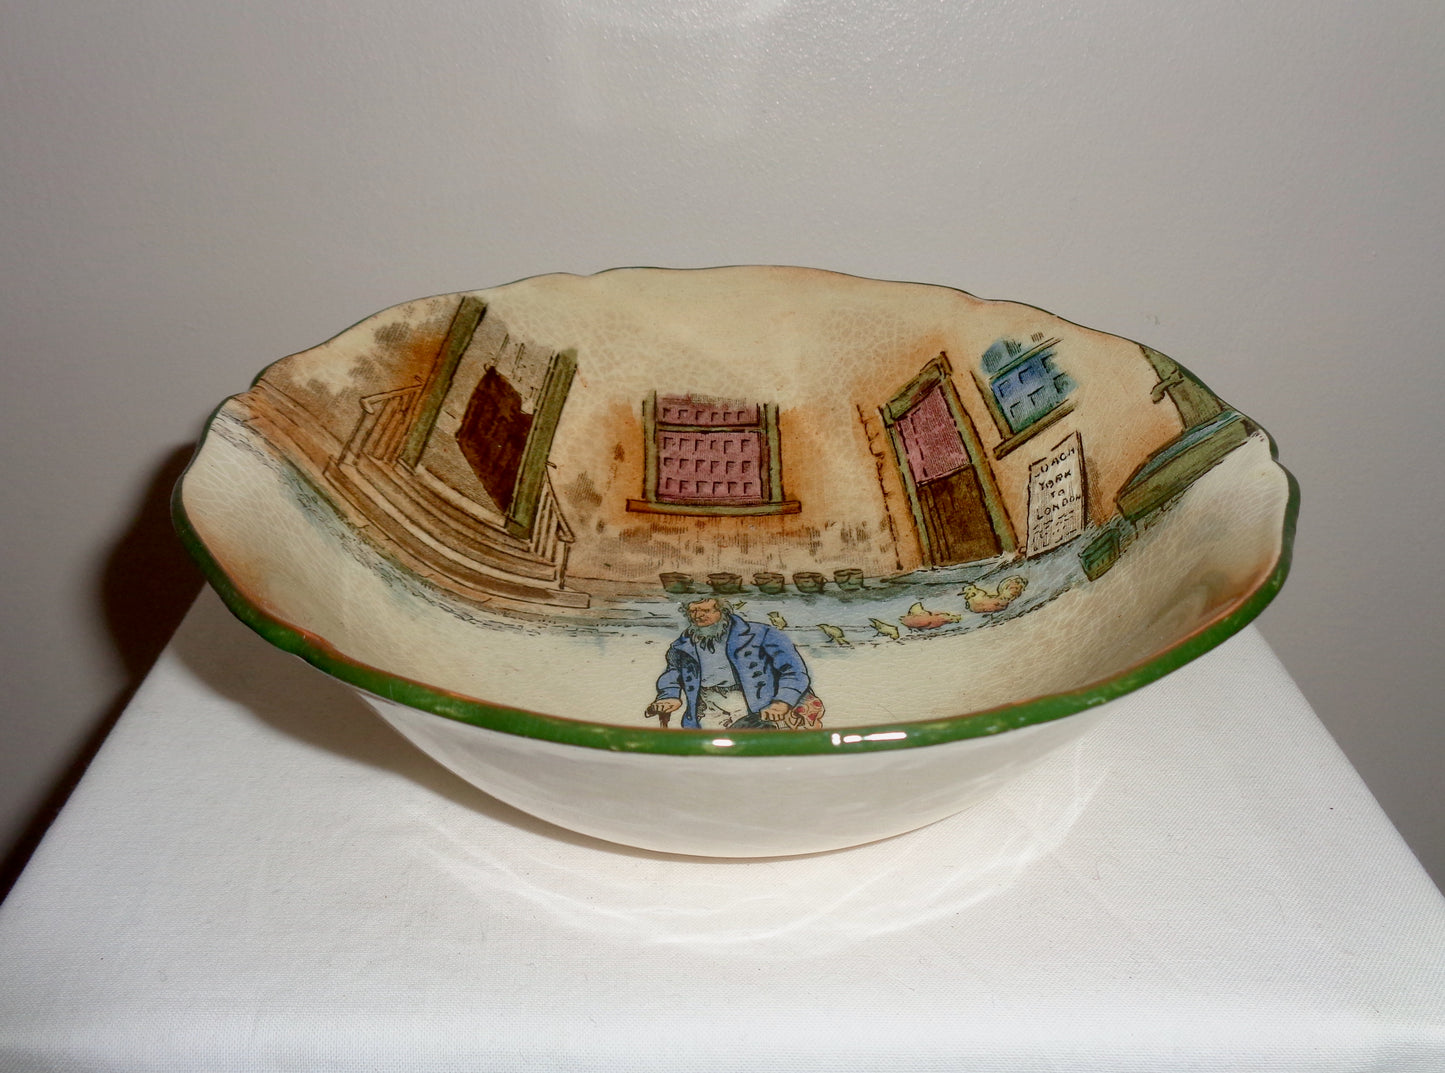 1930s Royal Doulton Dickens Ware Old Peggoty 6 Inch Dessert Bowl. Pattern Number D2973